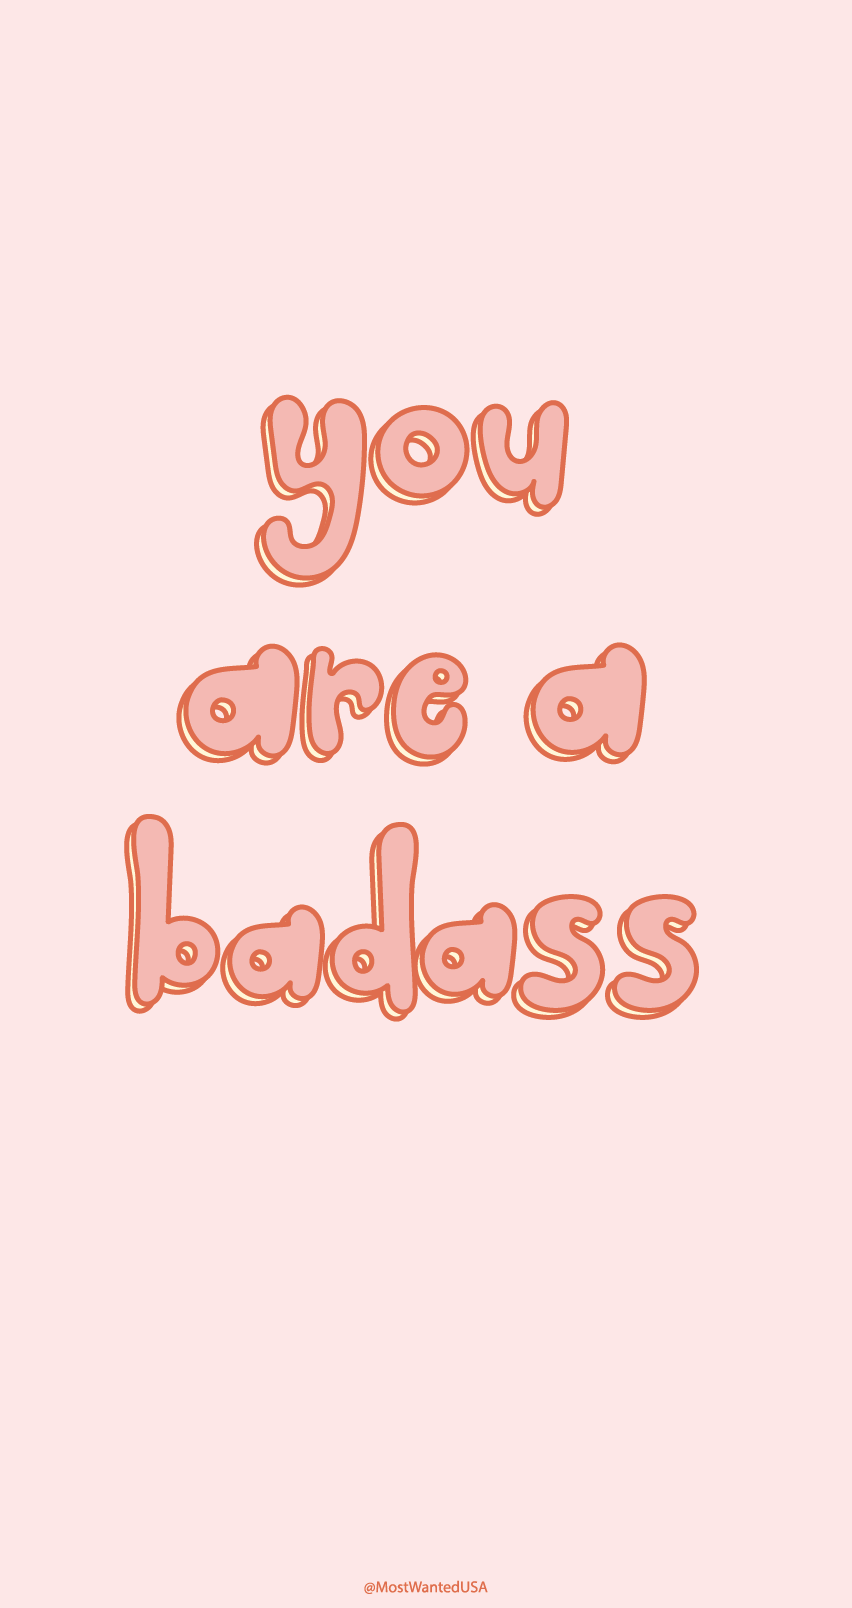 You are a badass colorful and inspiration iPhone background